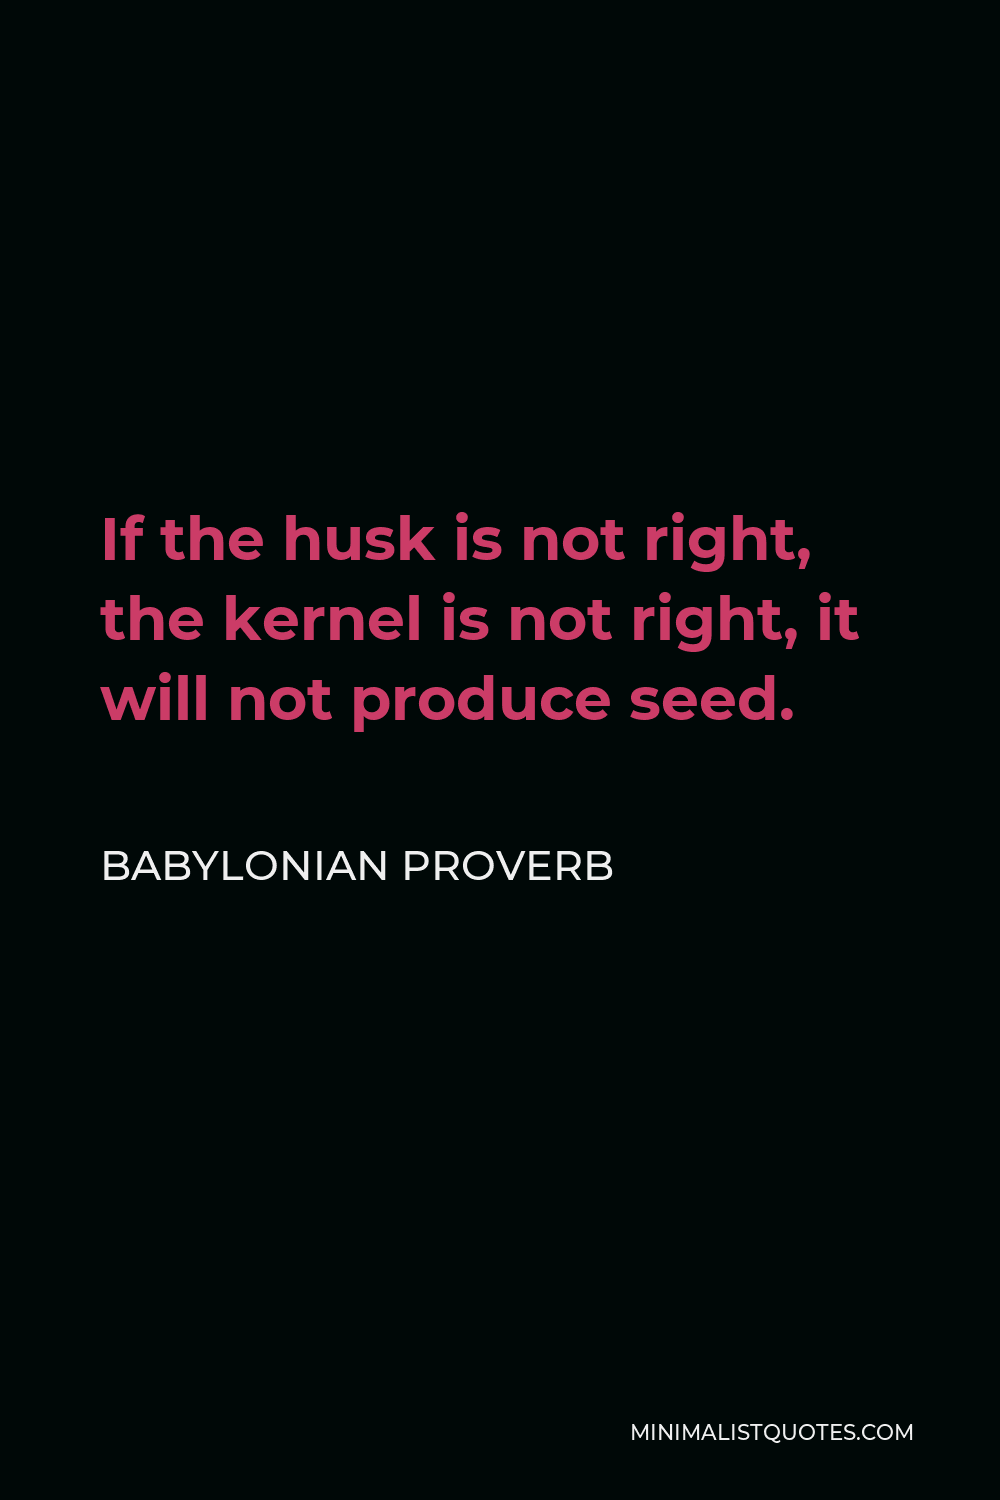 Babylonian Proverb Quote - If the husk is not right, the kernel is not right, it will not produce seed.